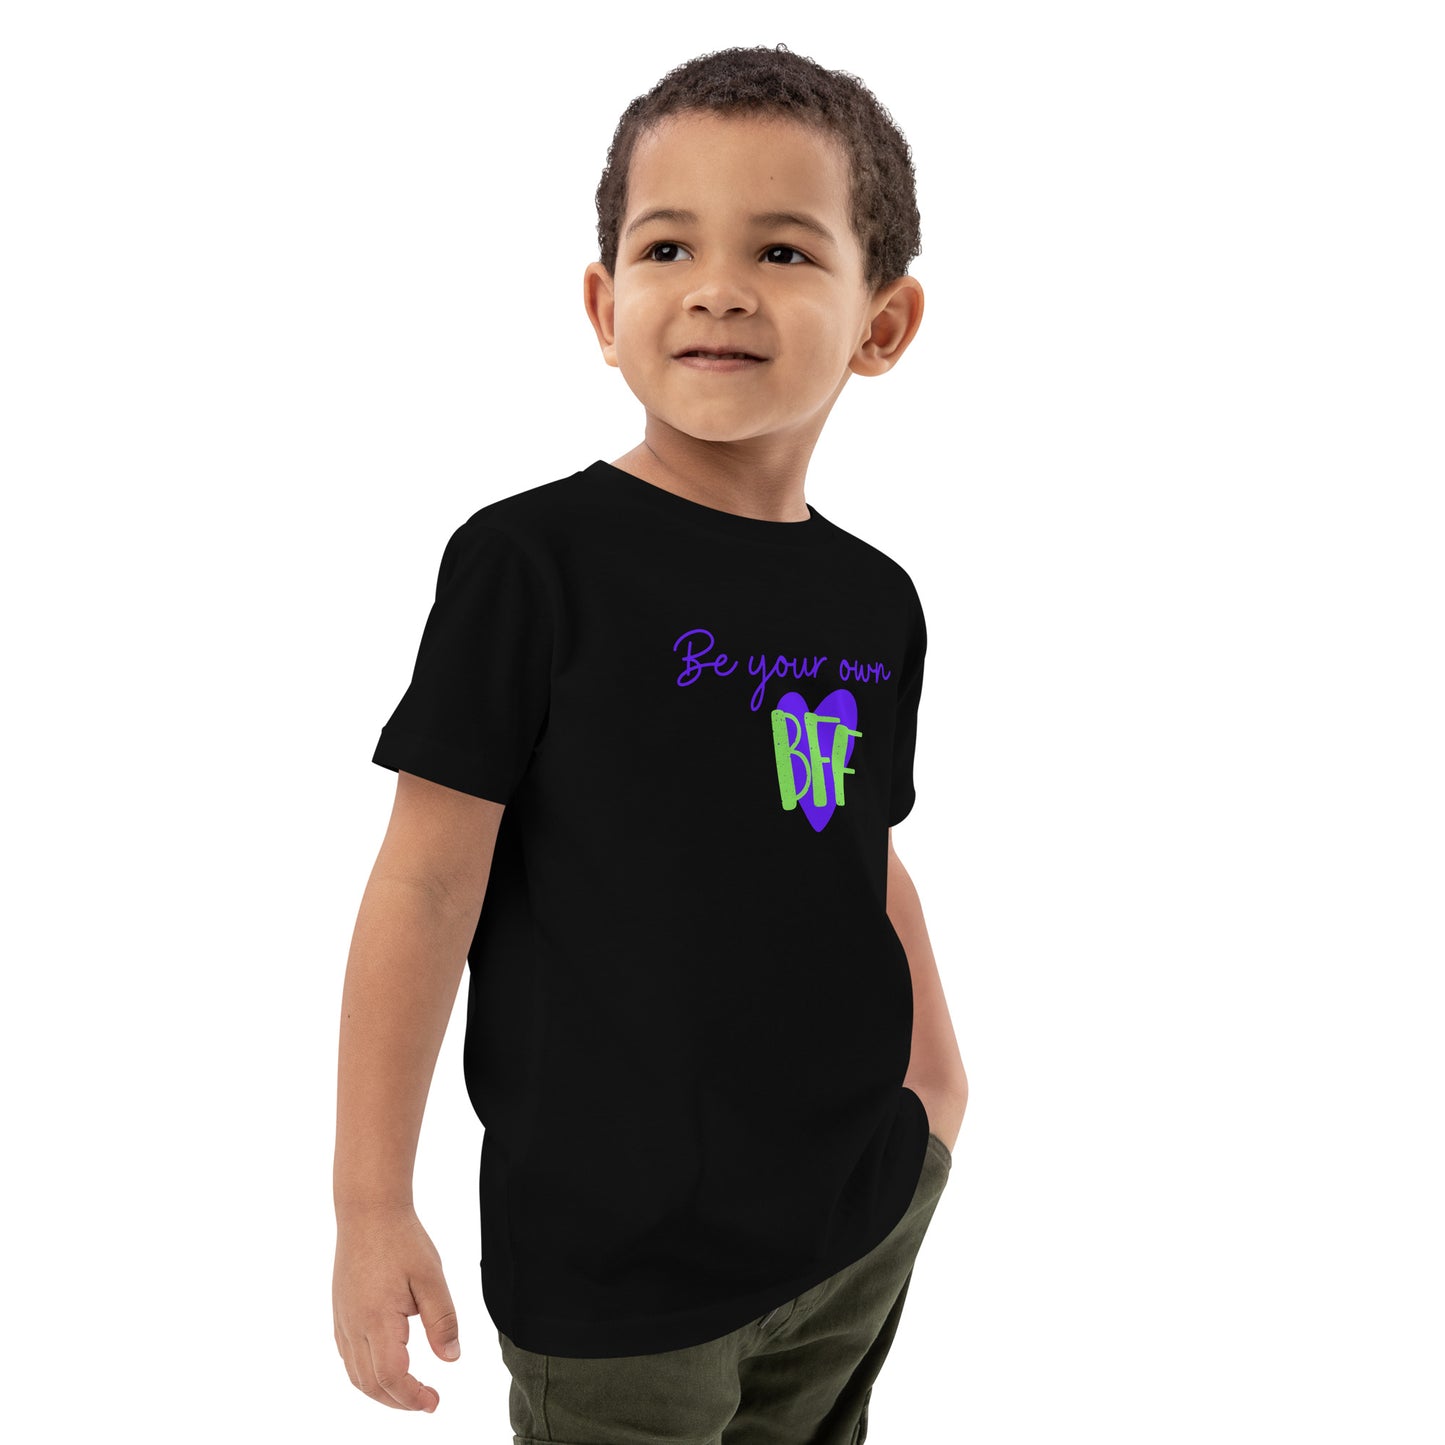 Organic cotton kids t-shirt - Be your own BFF